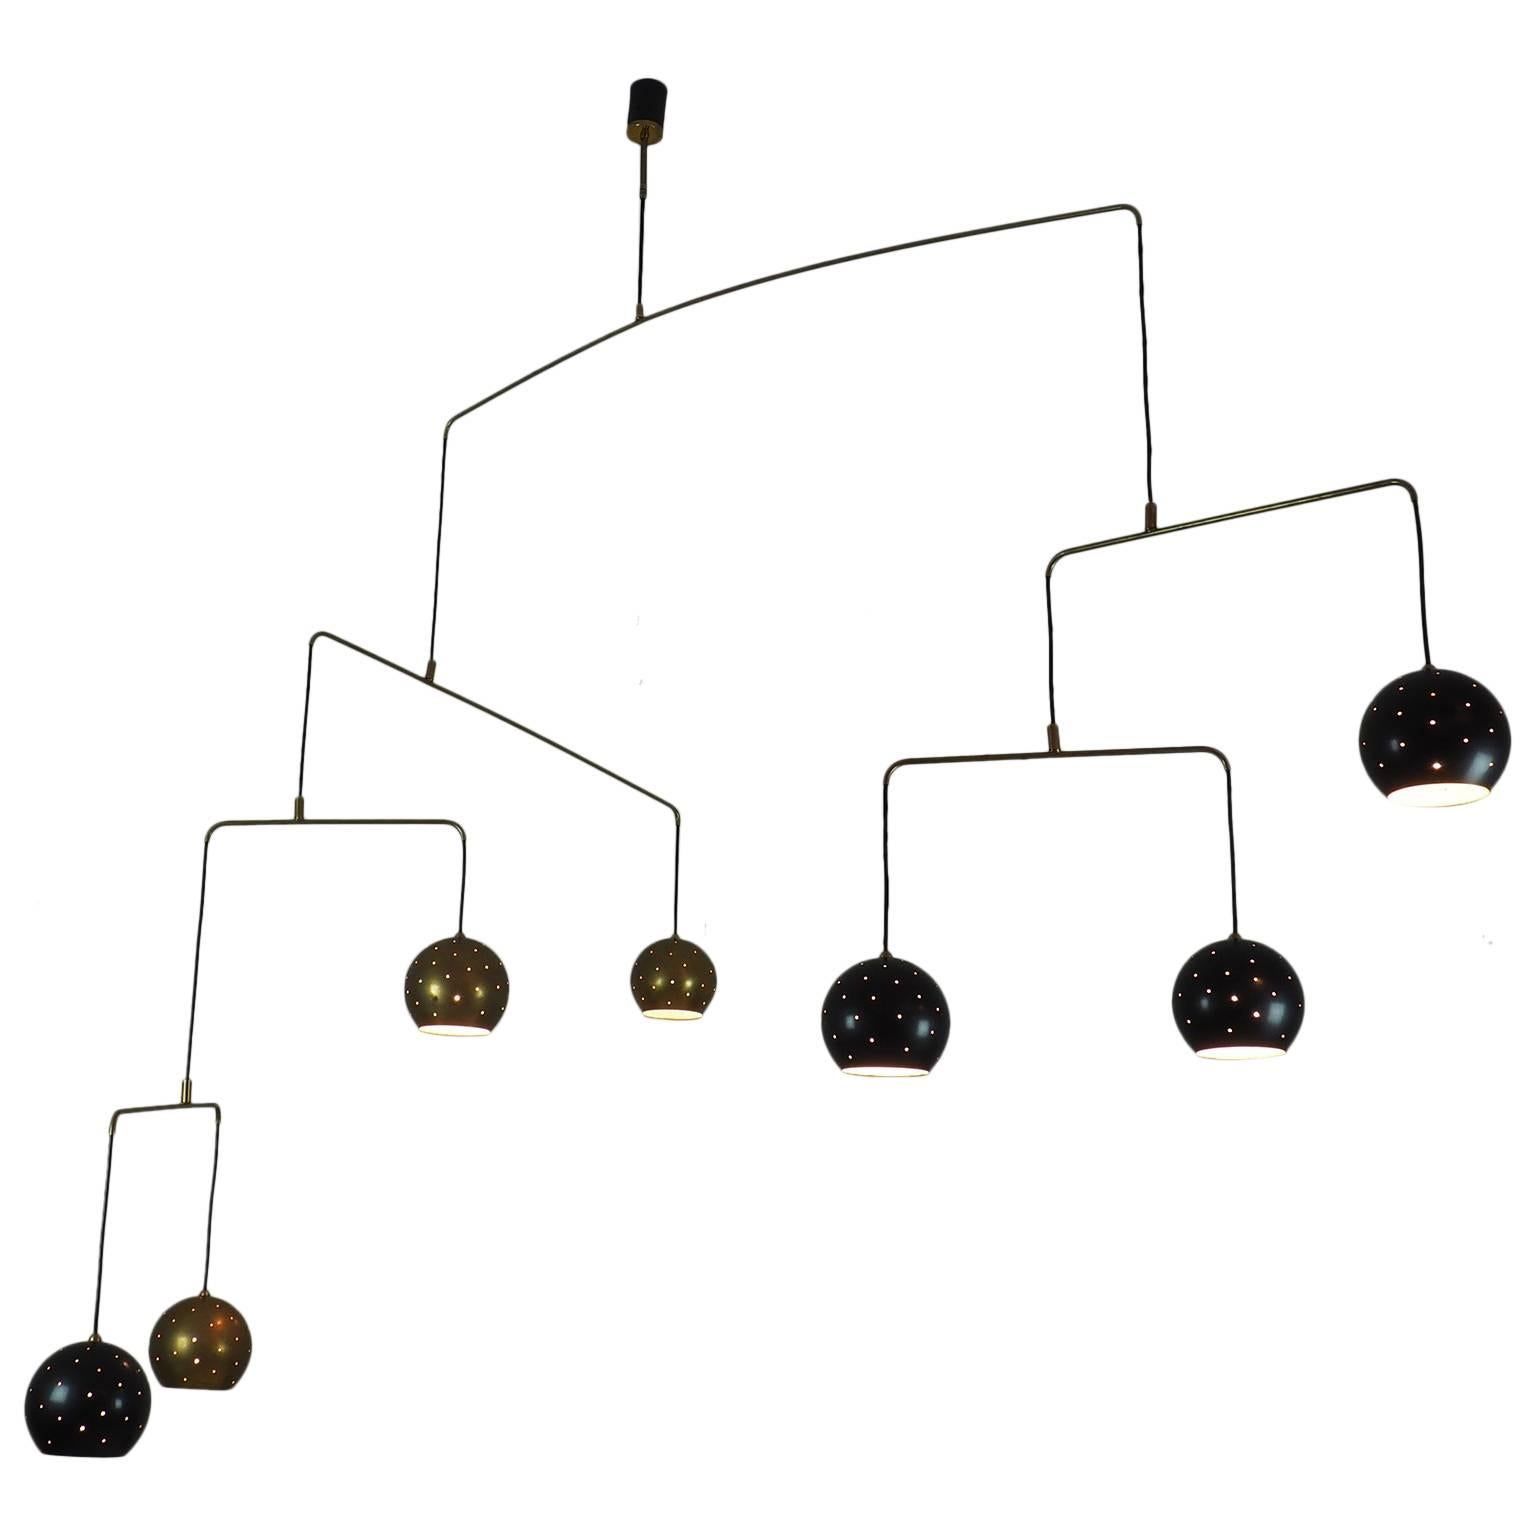 The   ITALIAN vintage   Mobile chandelier.
Large magic and poetic  Mobile chandelier with brass and black suspending spheres that move with the flow of air.
Wholly in balance through brass arms and the interaction of the weights of the balls and